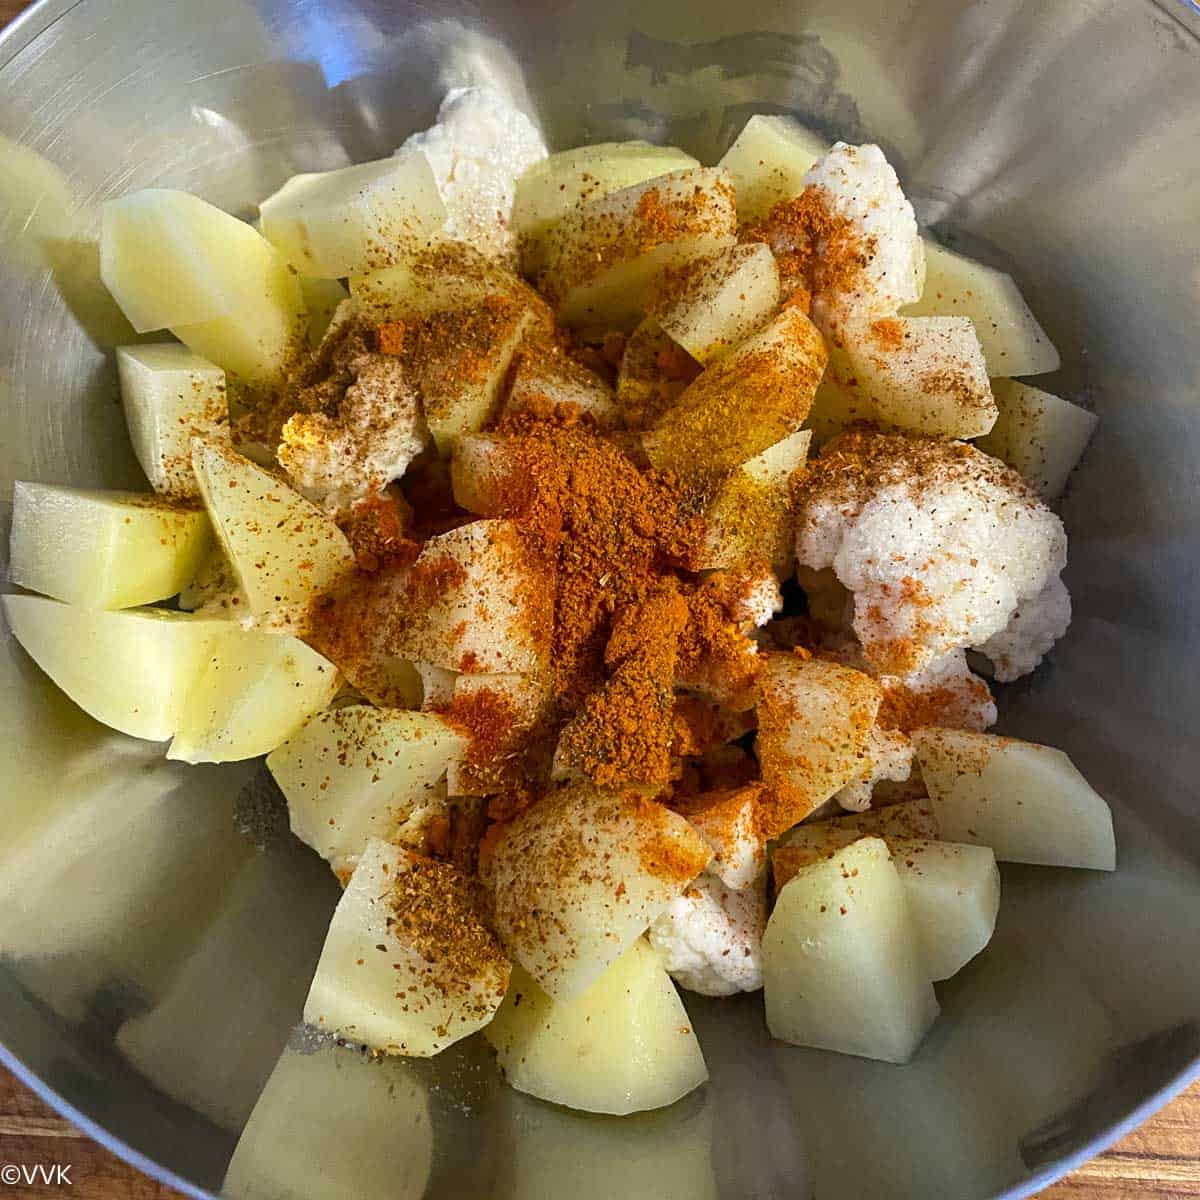 adding spices to the cauliflower and potatoes